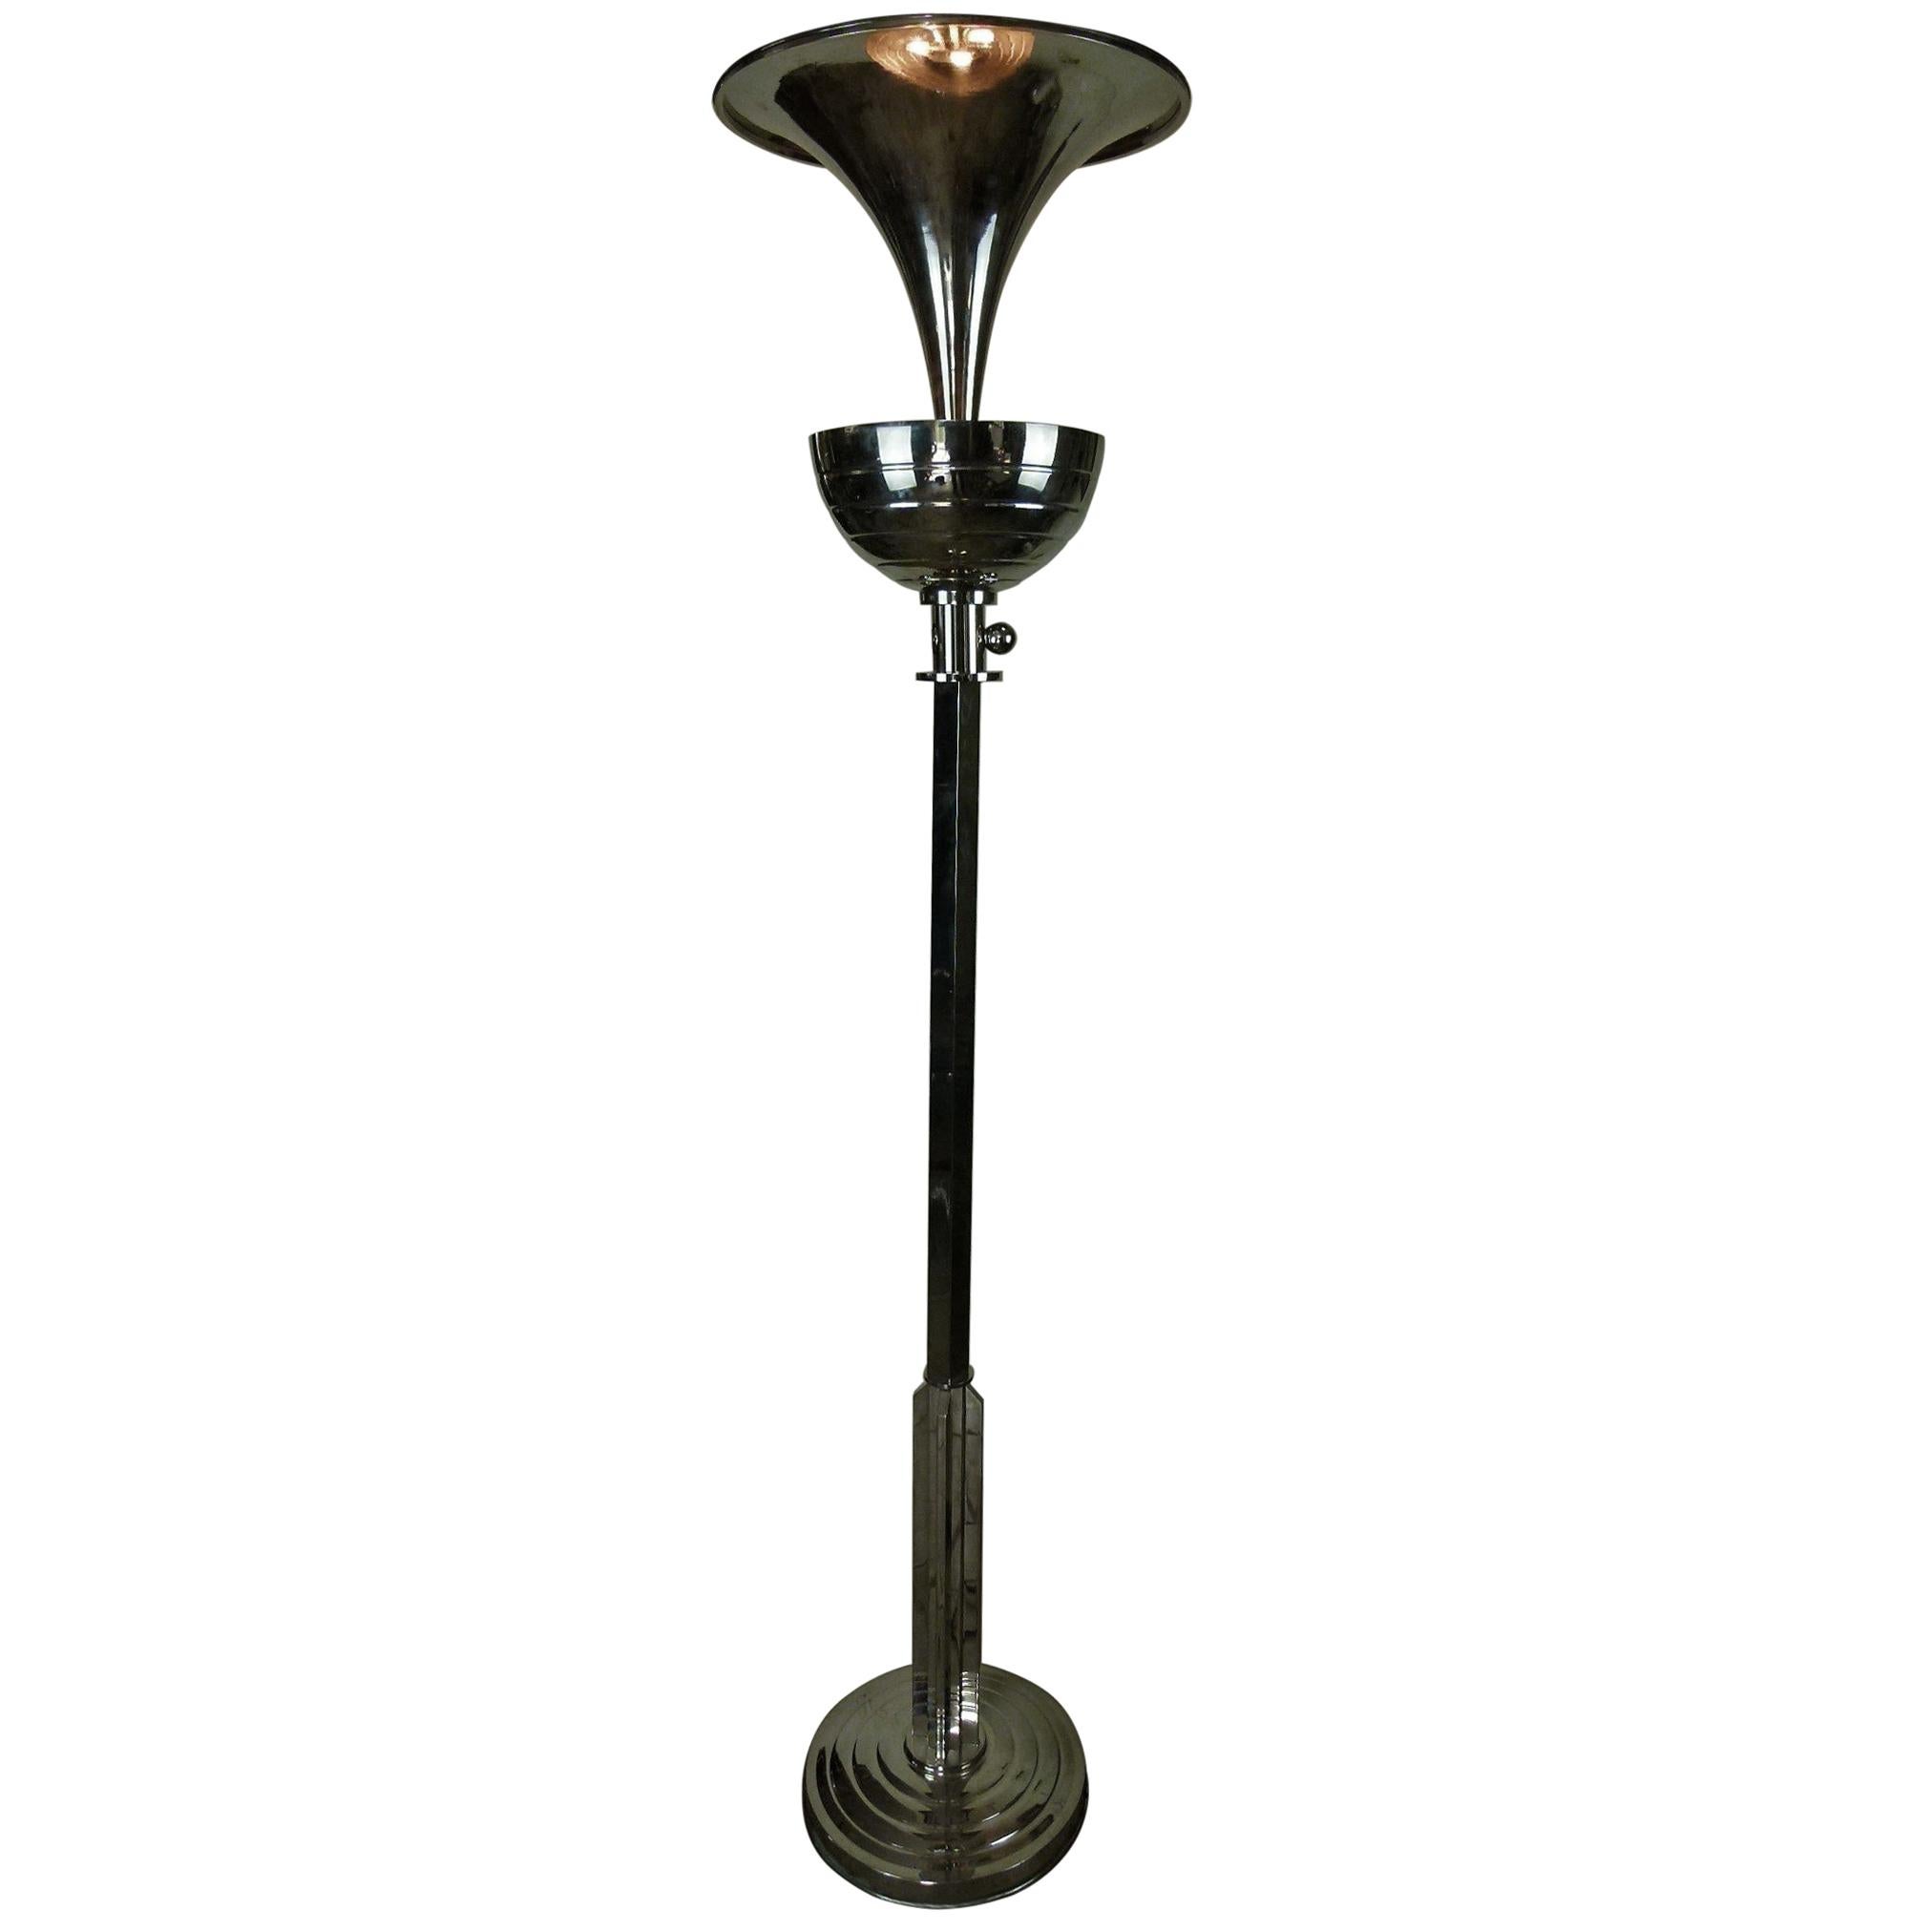 Art Deco Modernist Floor Lamp with a Double Basin in Nickel-plated Metal